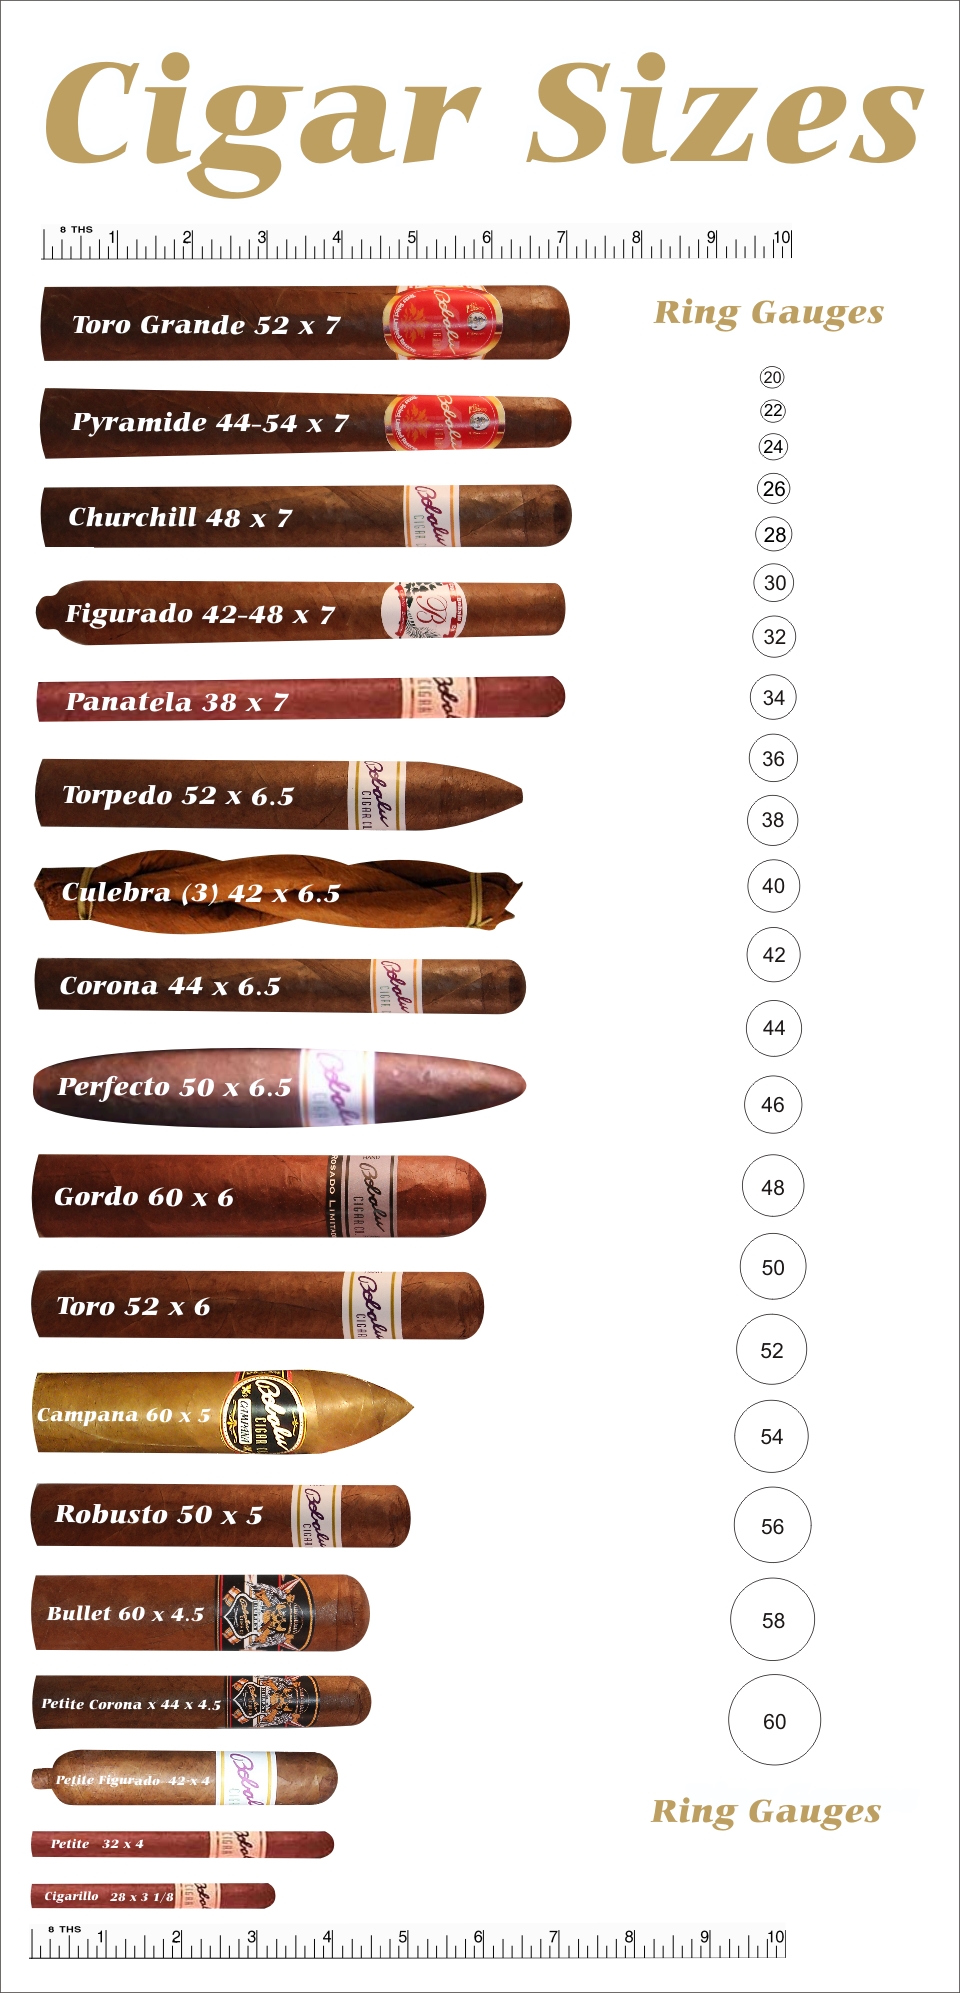 cigar_sizes_1_white_real_size_2012